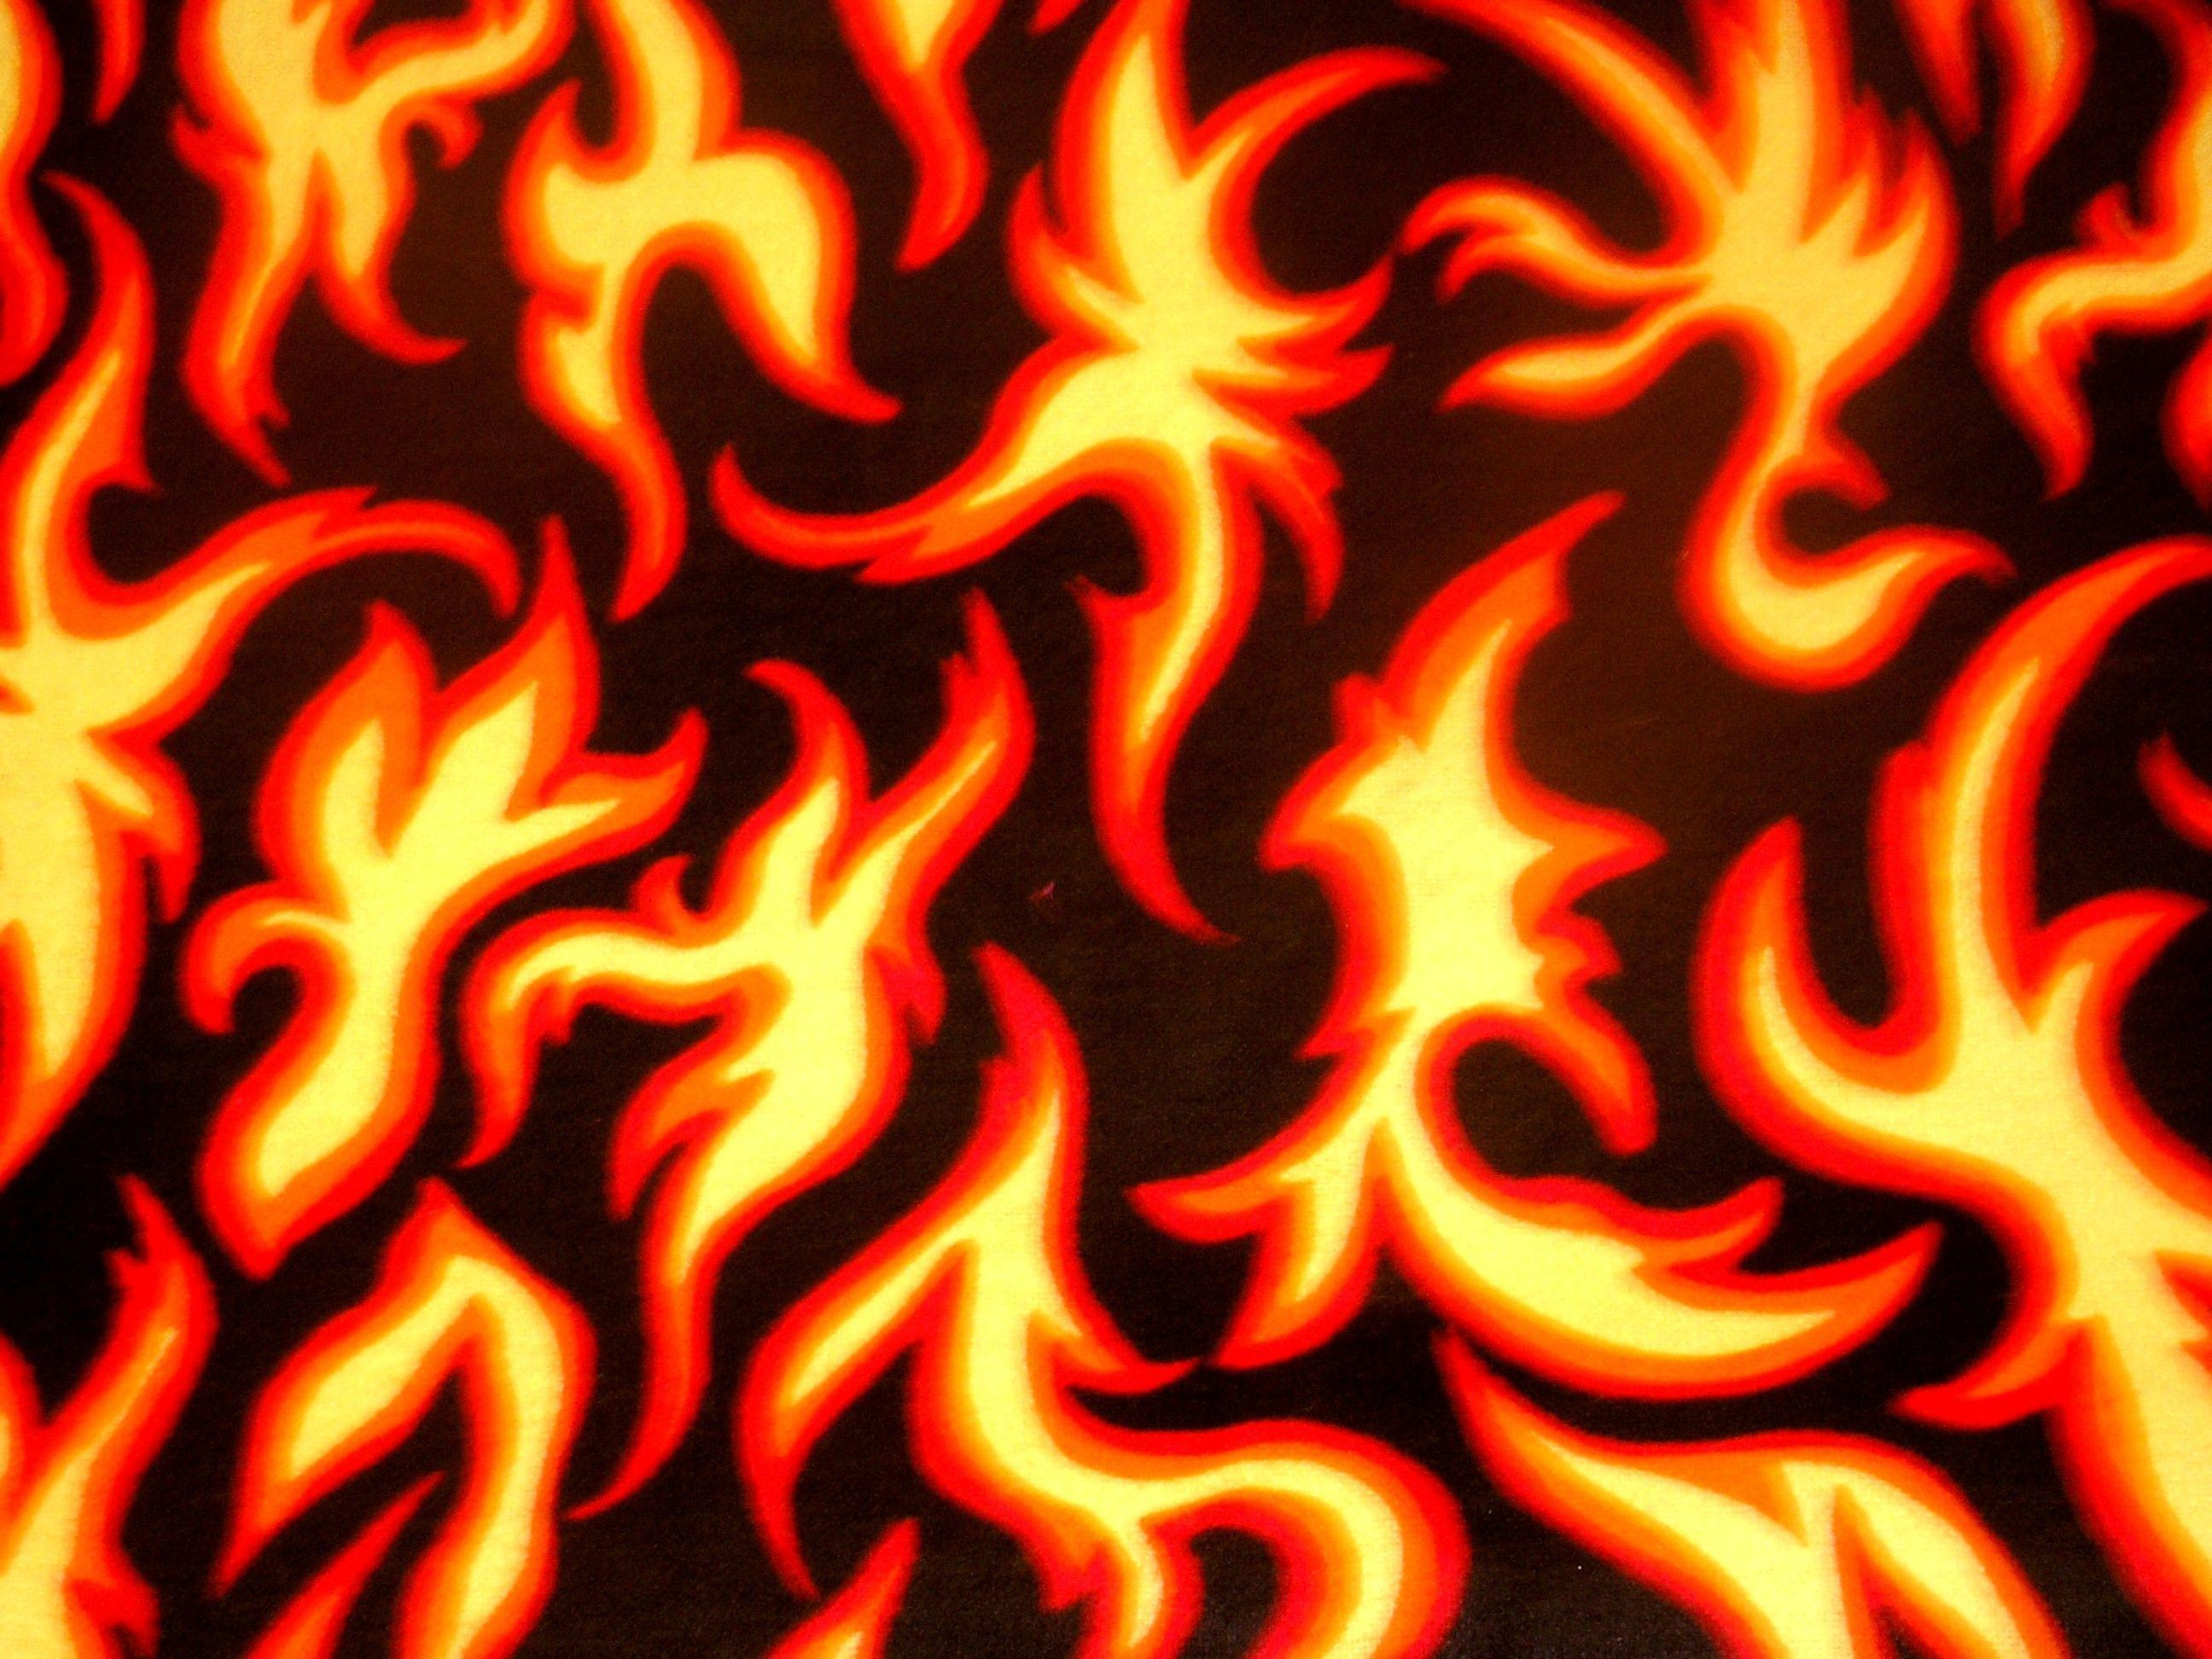 A close up of flames on the wall - Flames